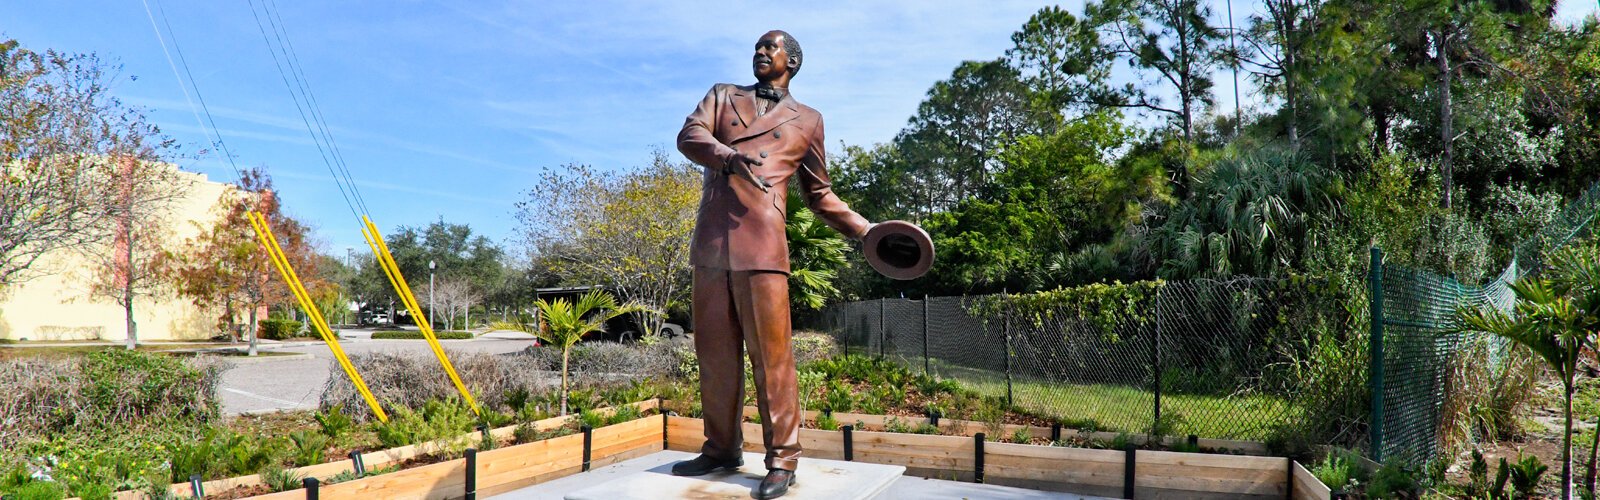 Born into slavery in the mid-1800s, businessman, philanthropist and community leader Elder Jordan Sr. built the Manhattan Casino with his sons and is honored by a bronze statue just south of the historic building.